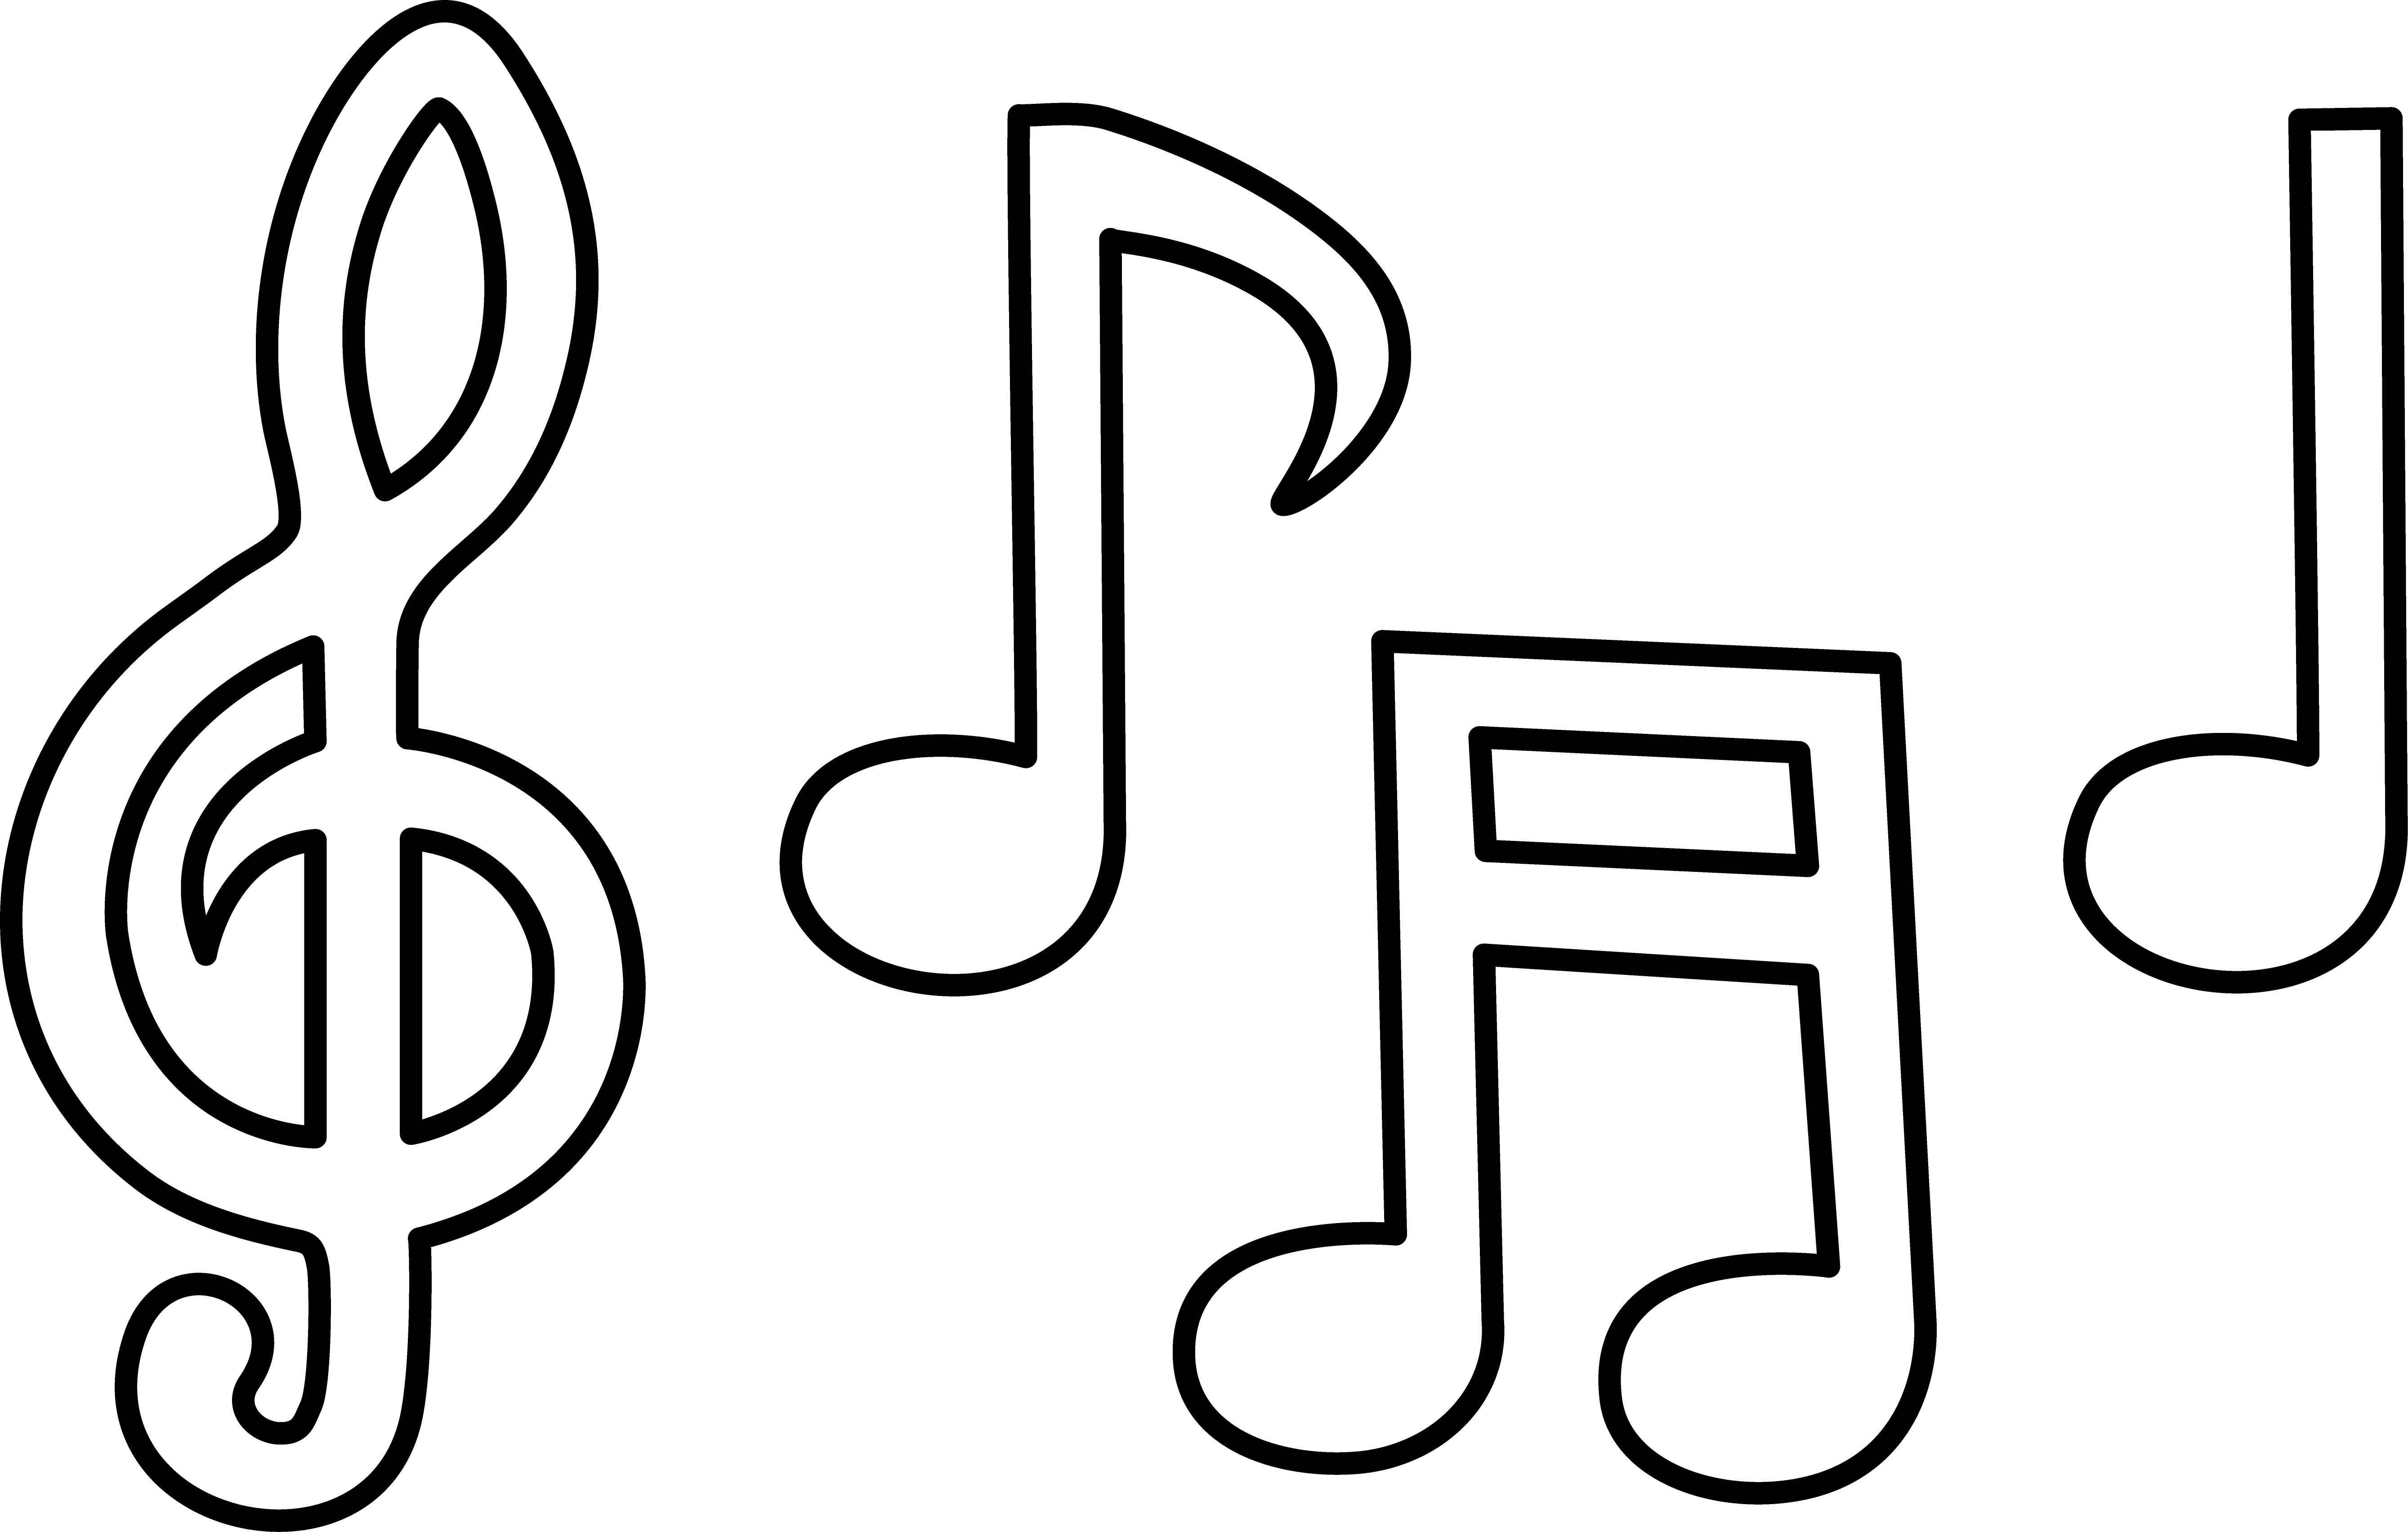 Clipart outline of music note